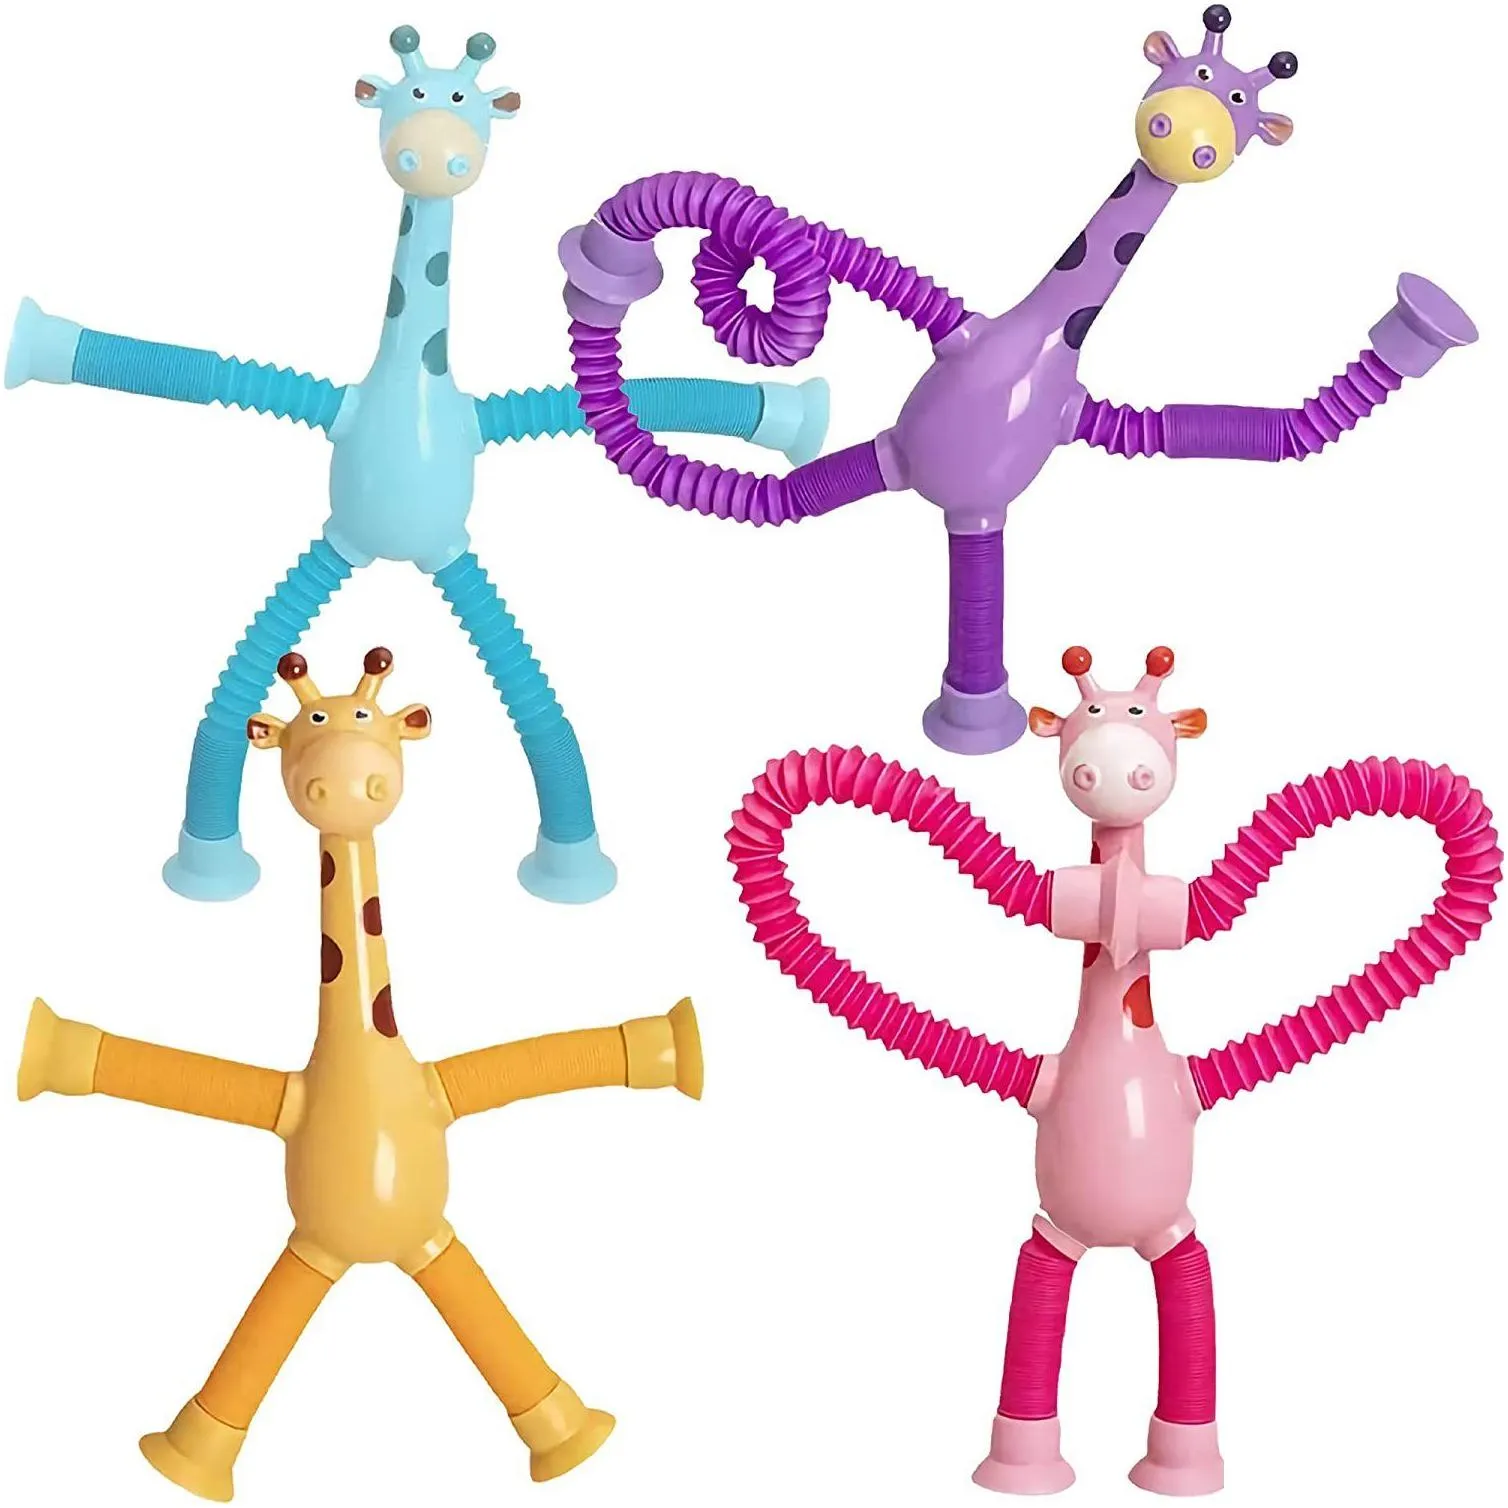 Decompression Toy Giraffe  Tubes Toys Telescopic Suction Cup Robot Toy Shape Changing Tube Fidget Sensory Puzzle Decompression For Dhz7M